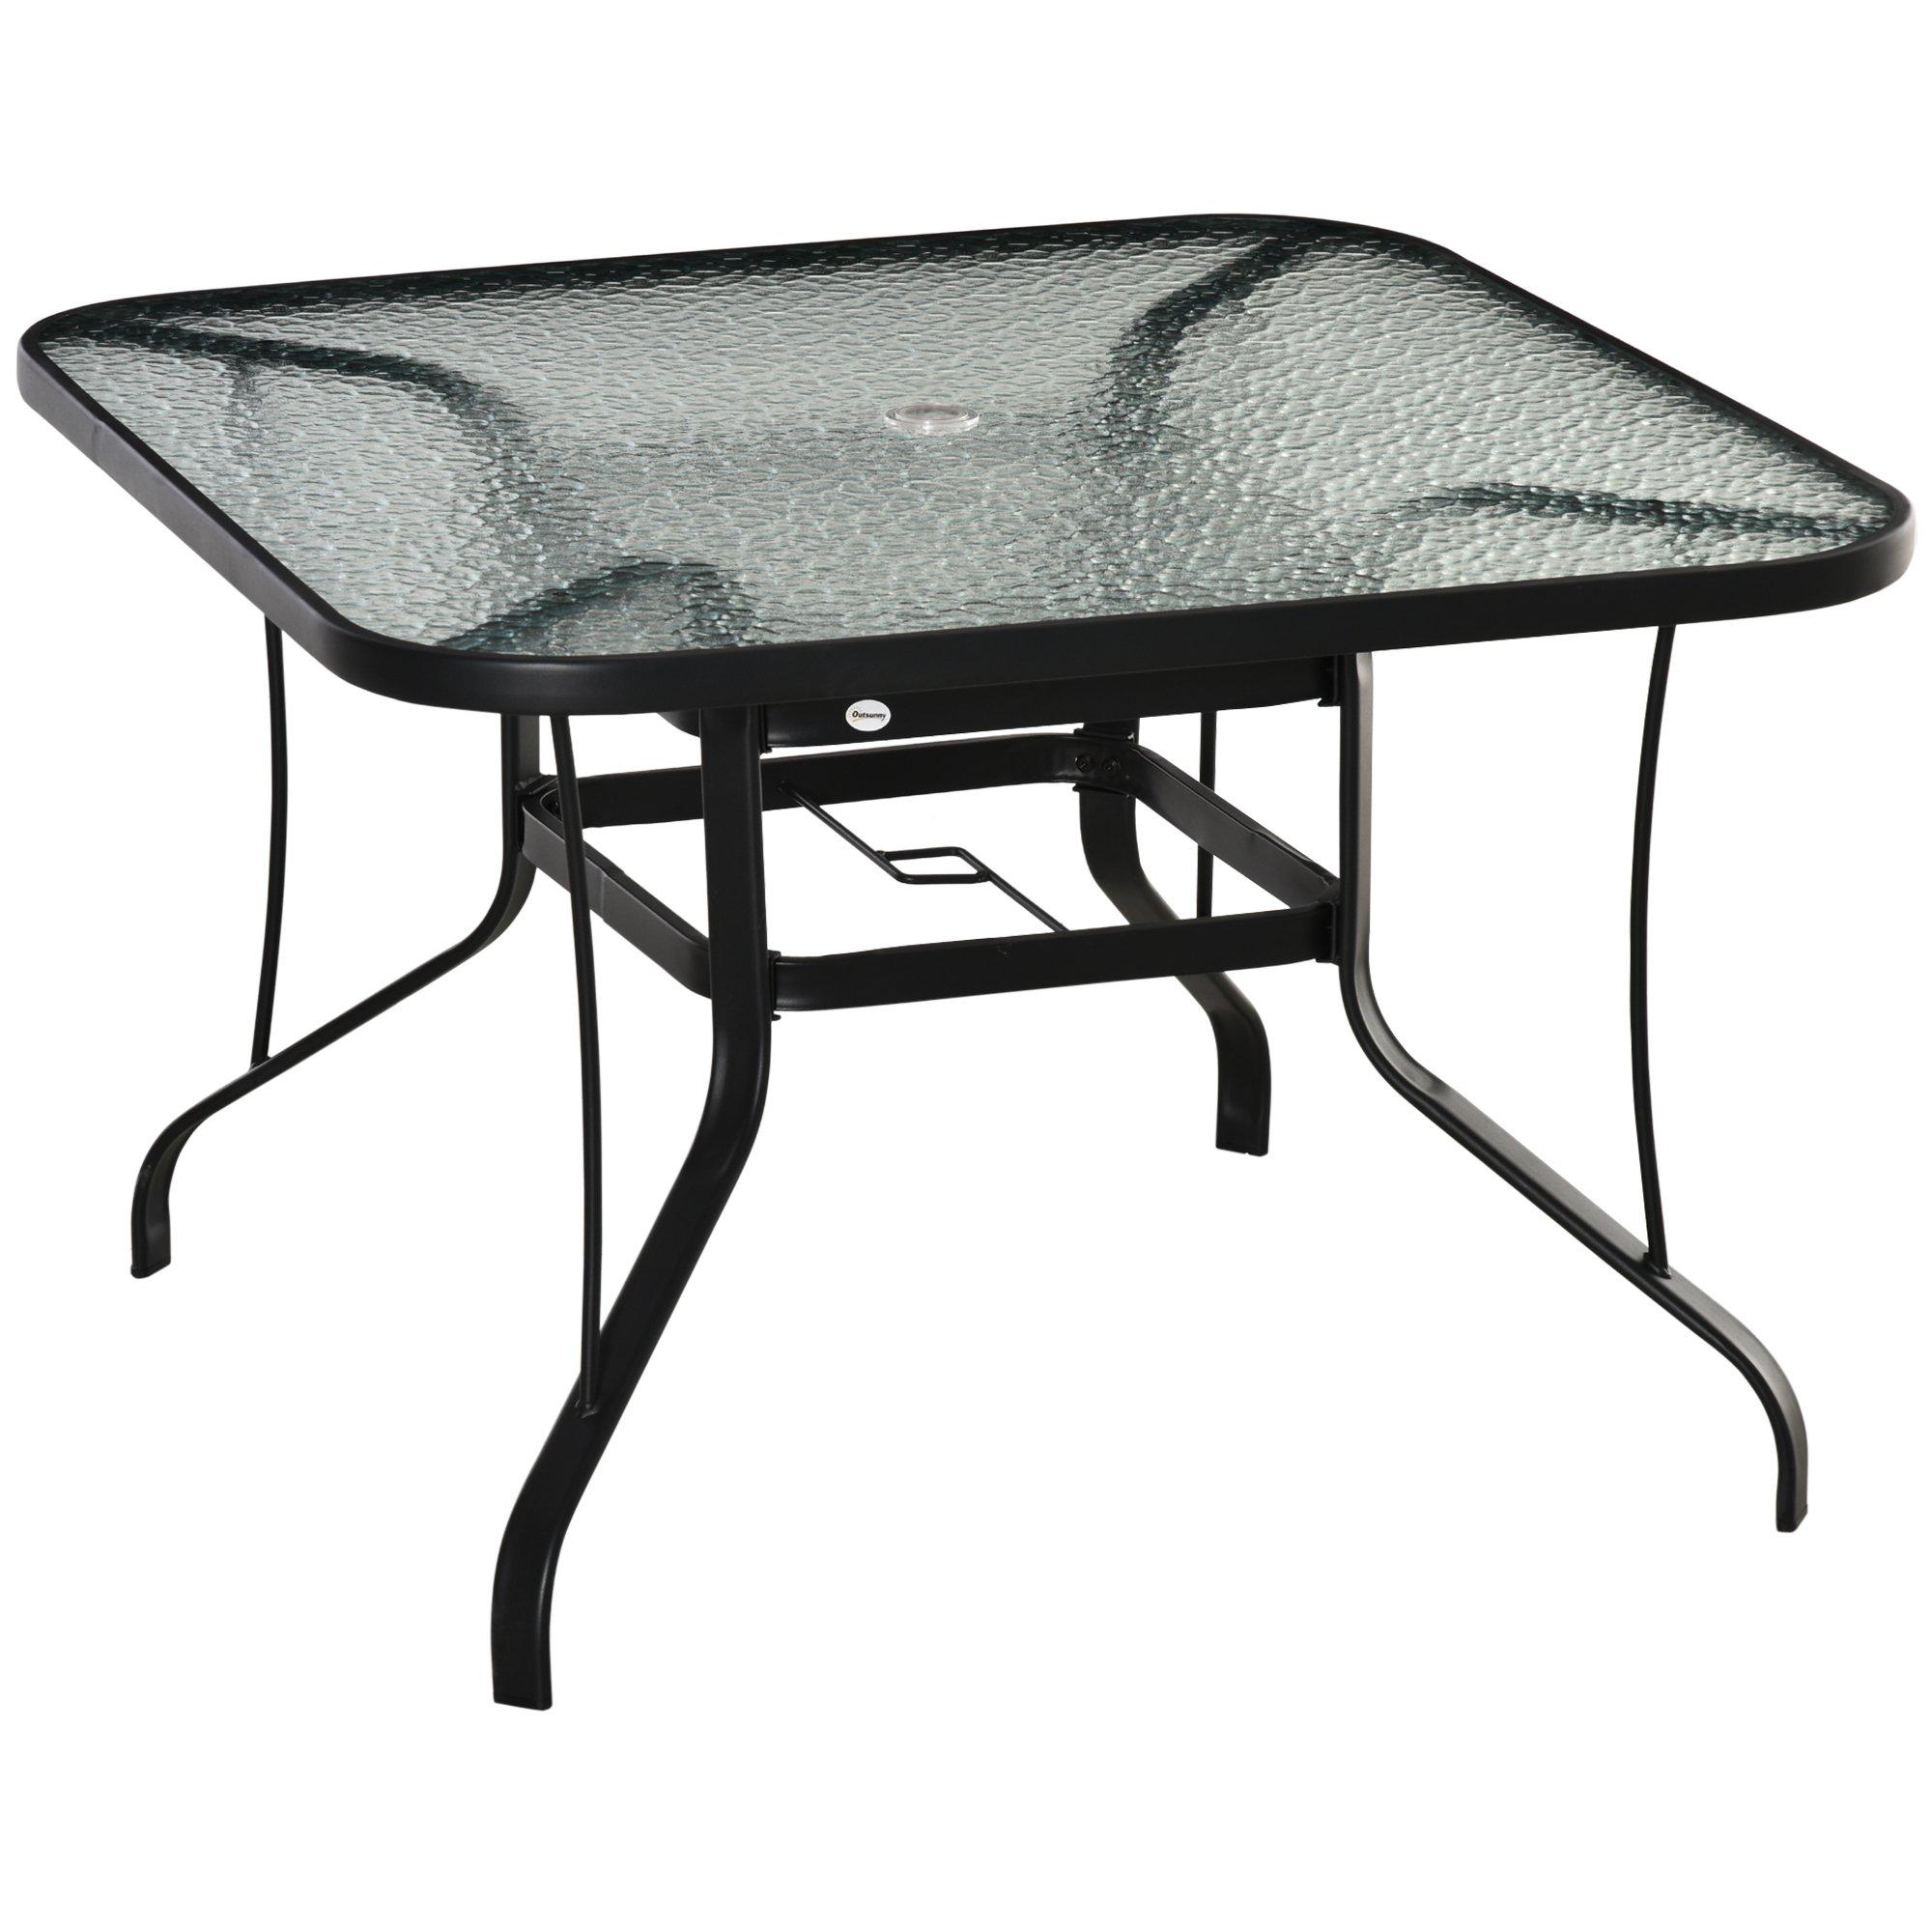 106.5cm Square Patio Dining Table with Parasol Hole, Glass Top